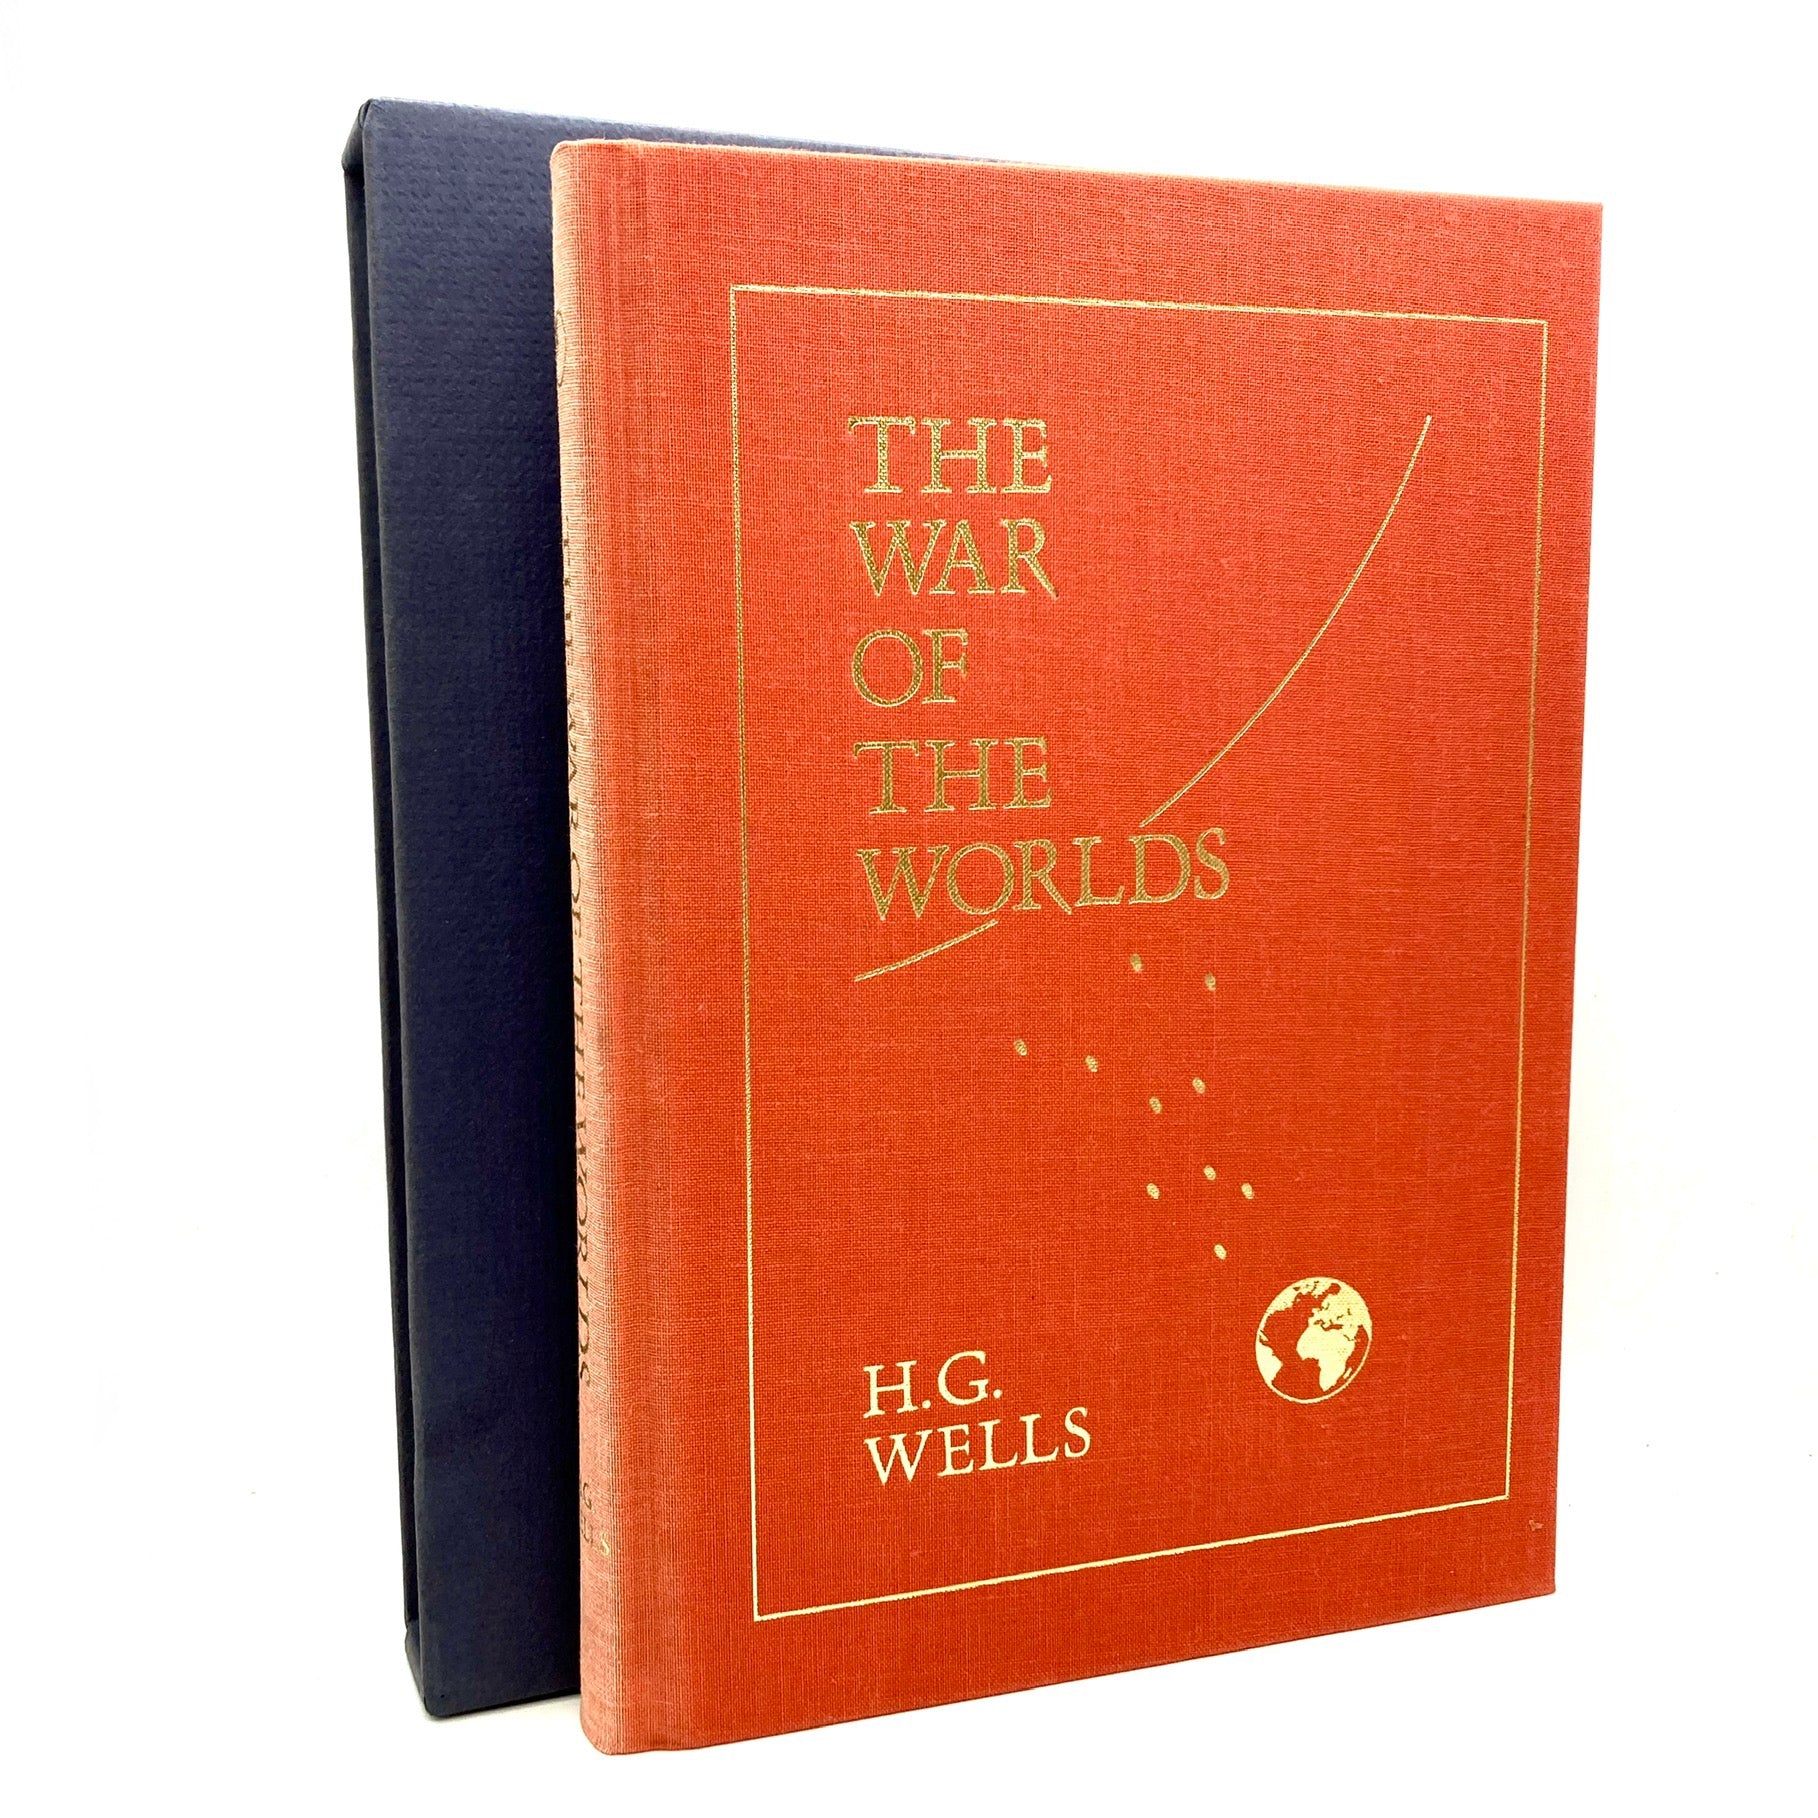 WELLS, H.G. "The War of the Worlds" [Heritage Press, 1964] - Buzz Bookstore